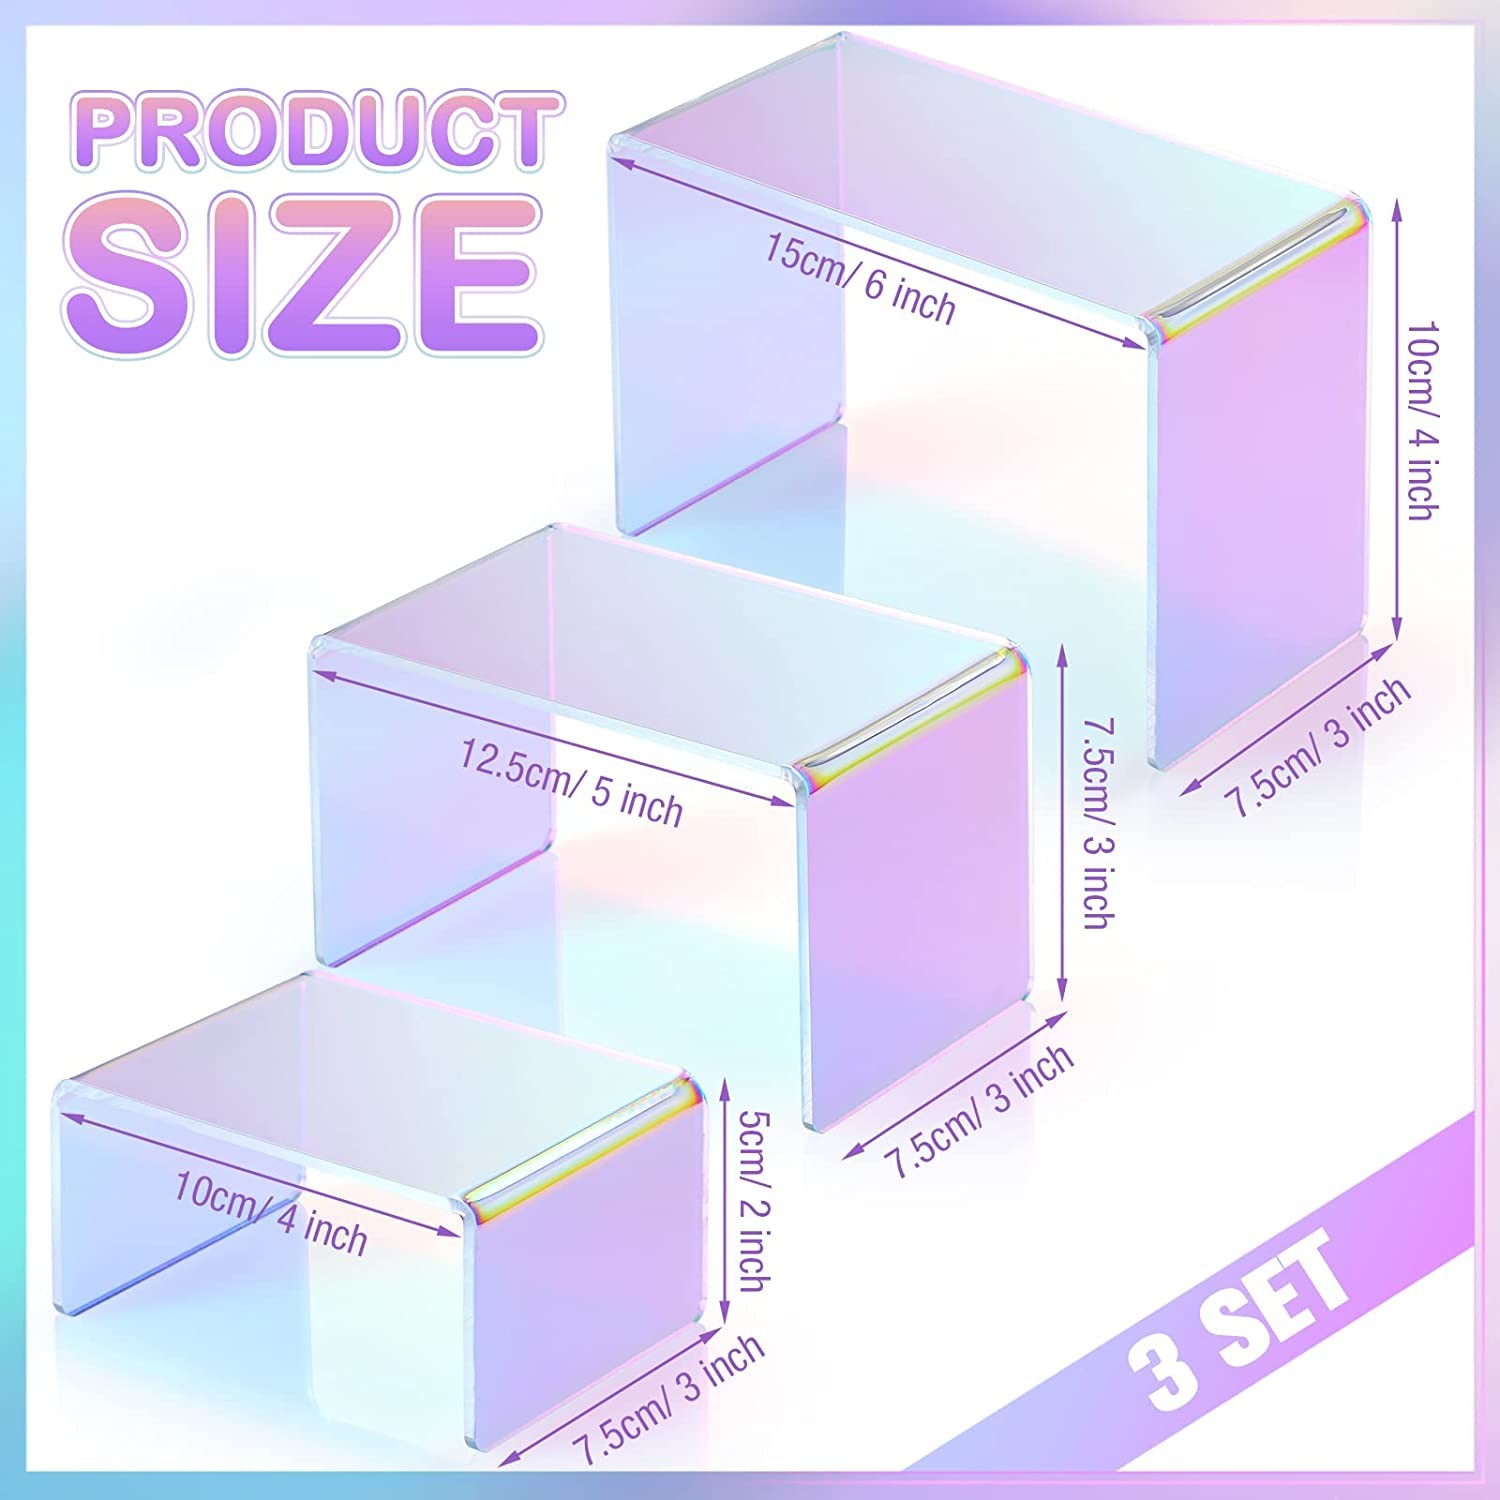  9 Iridescent Set Acrylic Display Risers , Sturdy Acrylic Candy Display Manufactures